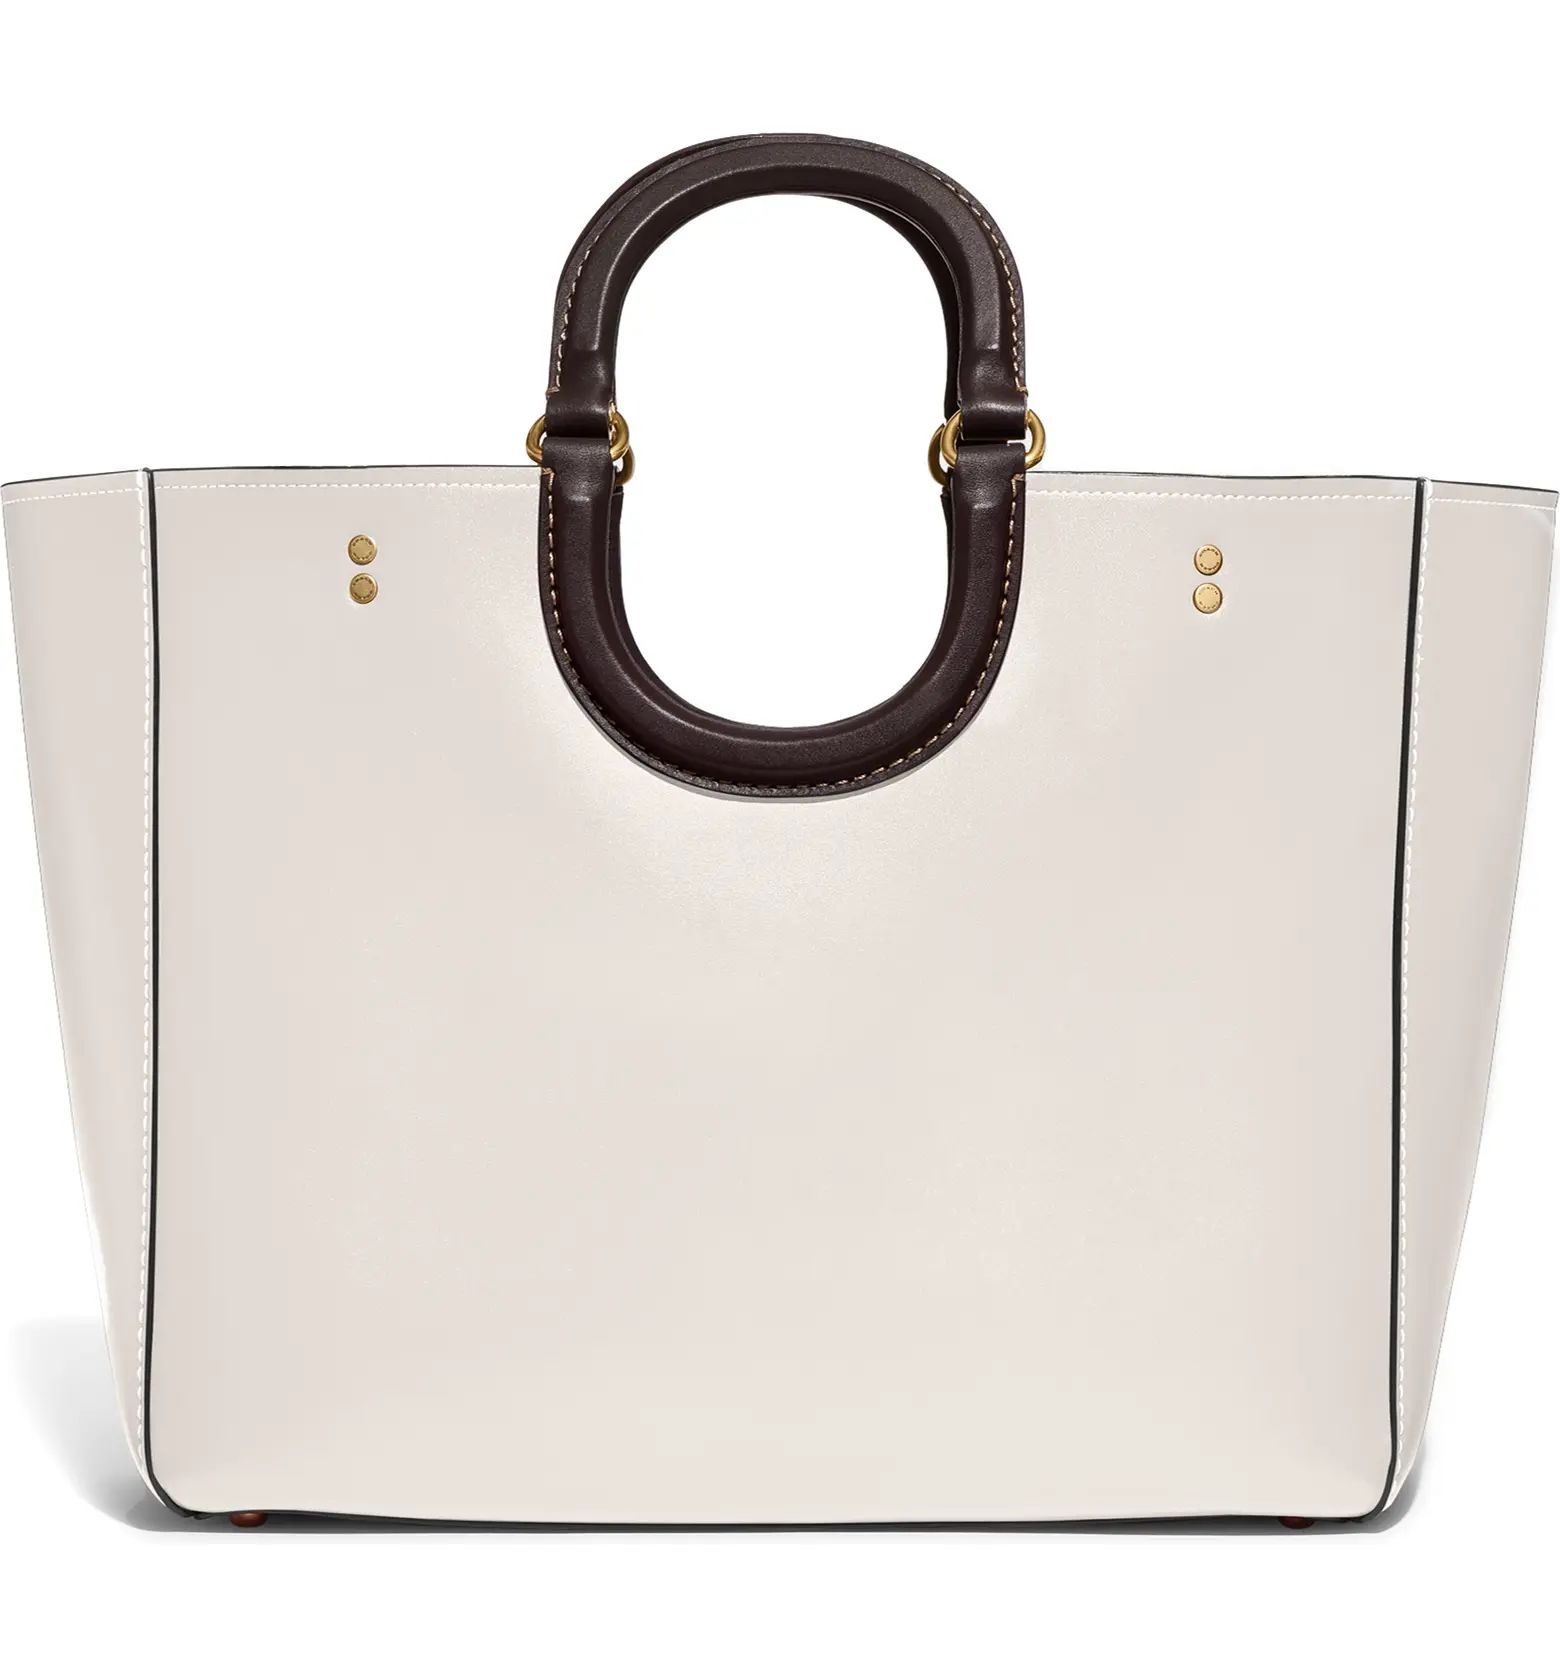 Rae Colorblock Glovetanned Leather Tote | Nordstrom